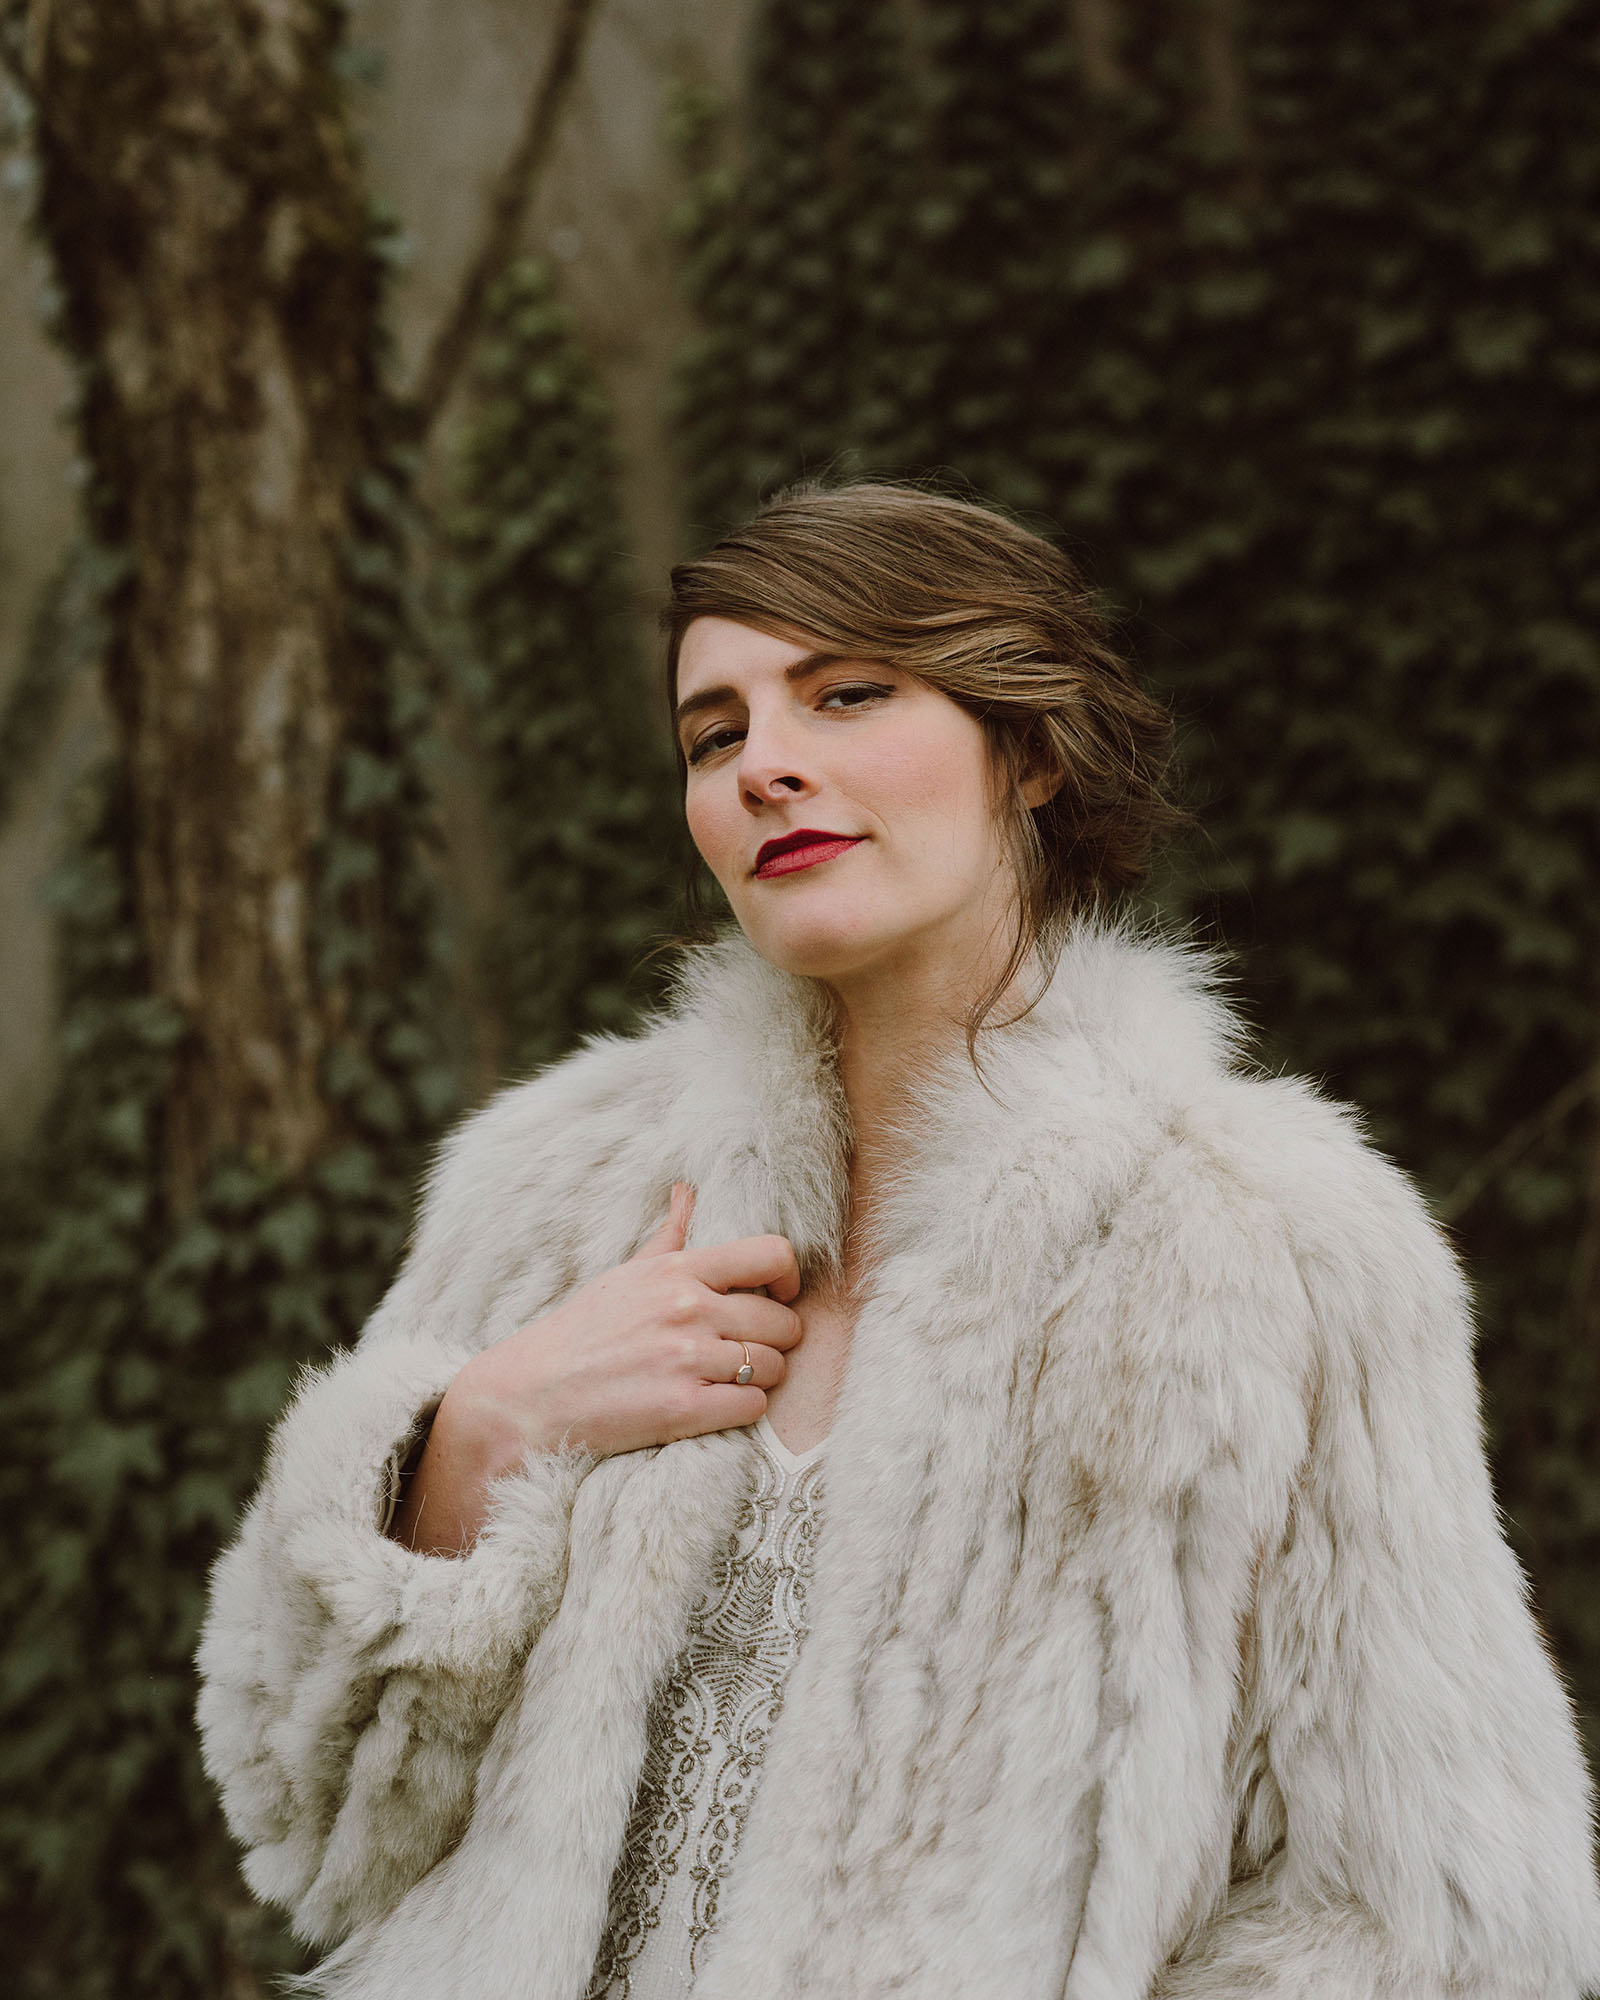 Portland Bridal Photography - Candid photo of Bride in a fur coat